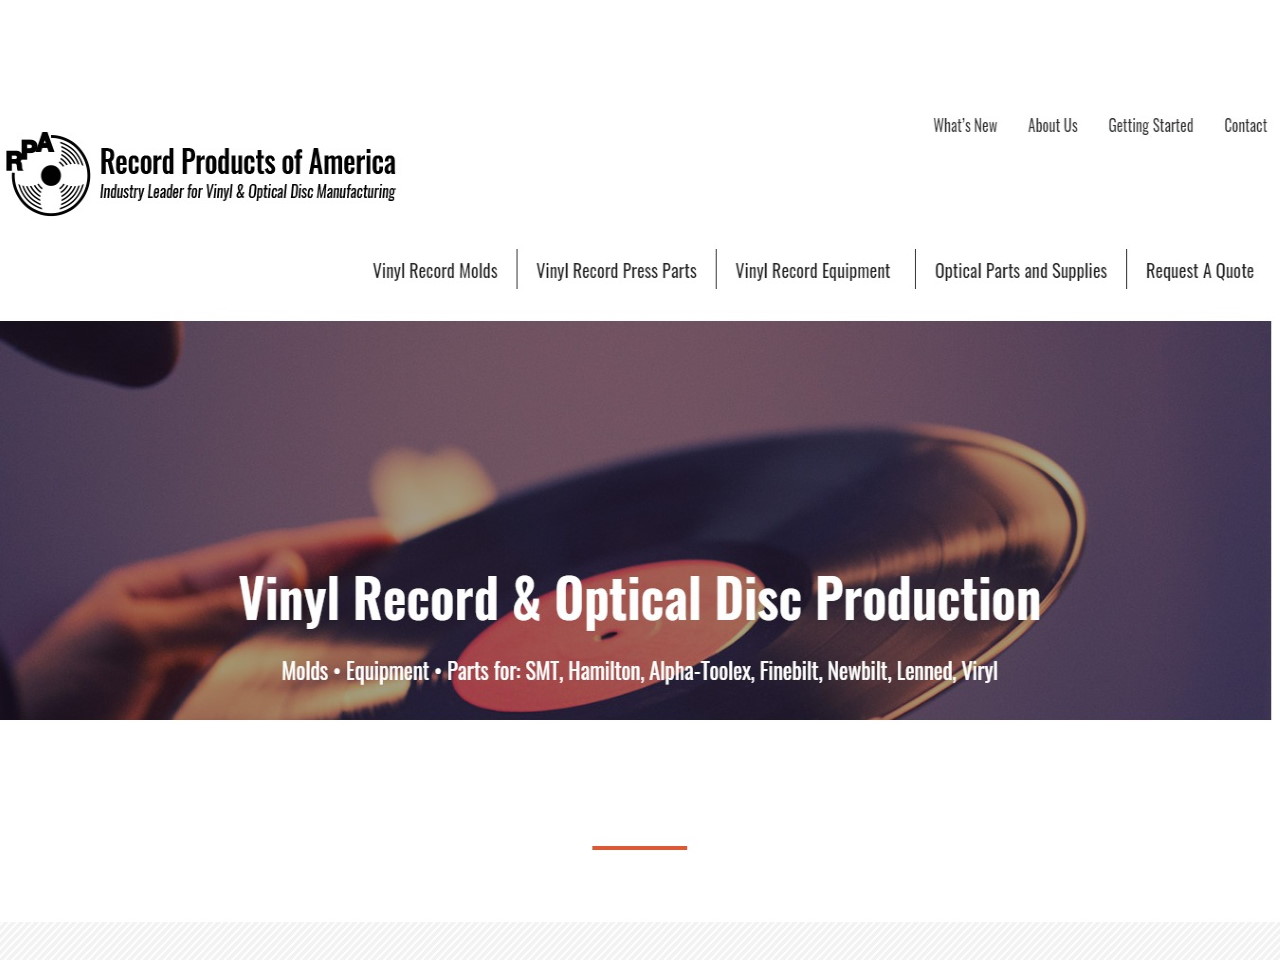 Vinyl Record Machines Record Products of America